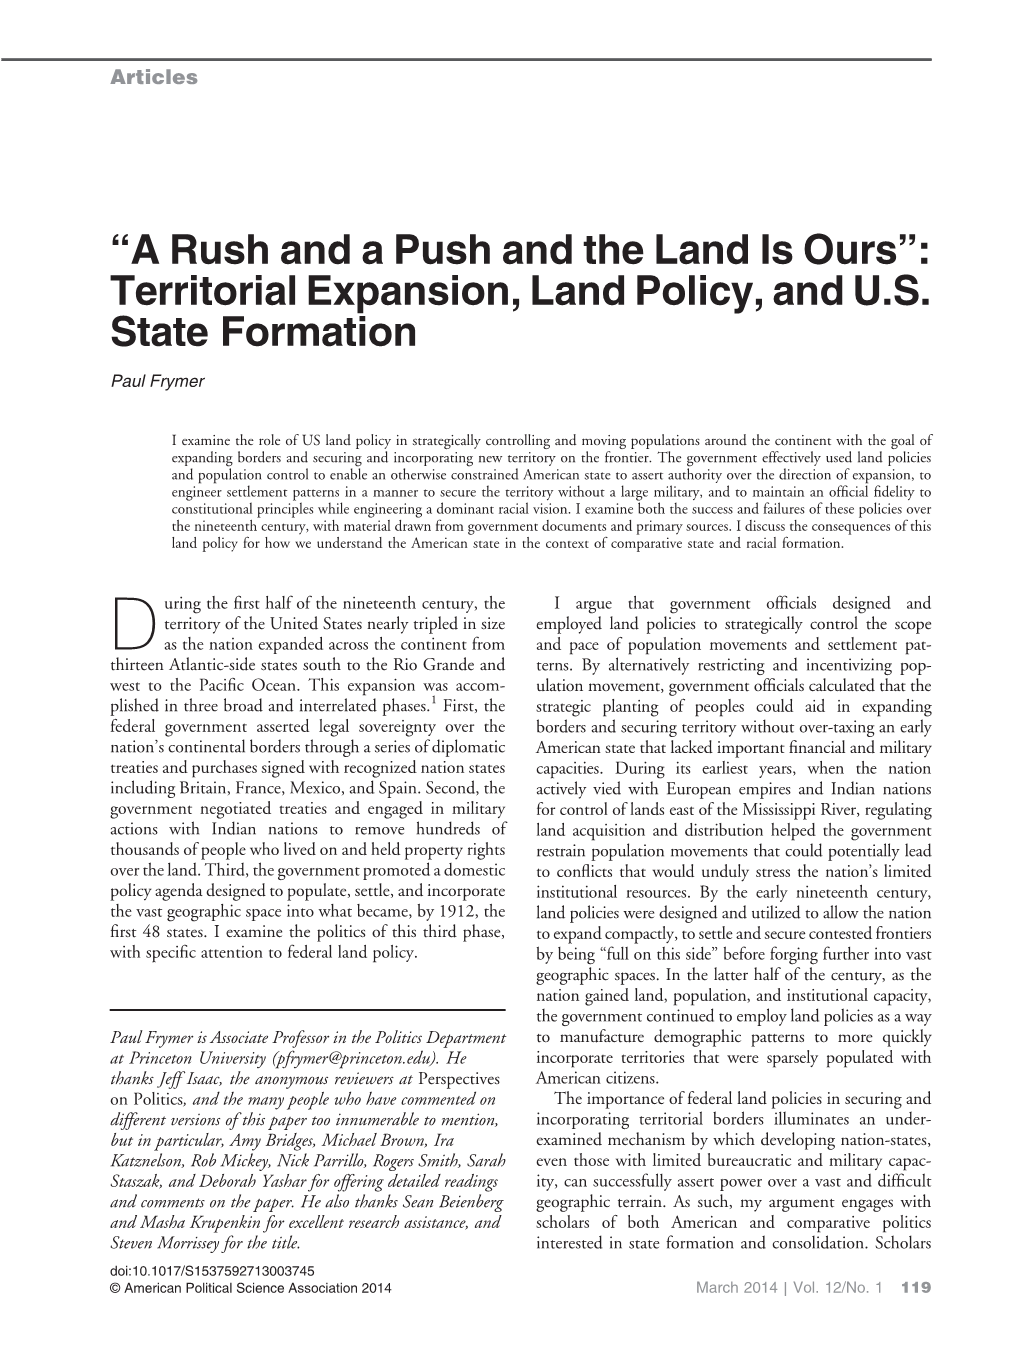 “A Rush and a Push and the Land Is Ours”: Territorial Expansion, Land Policy, and U.S